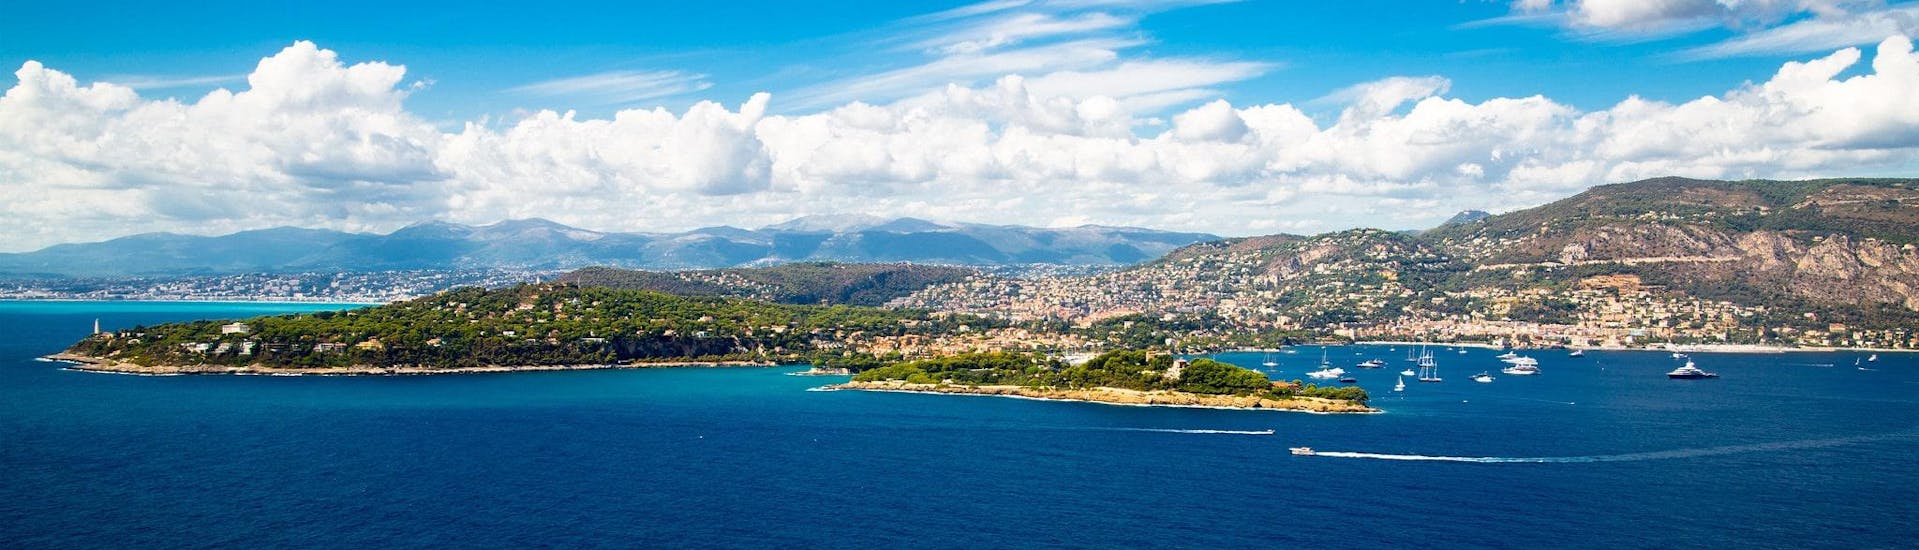 View of the French Riviera around St-Jean-Cap-Ferrat, a popular destinations for boat trips from Nice.